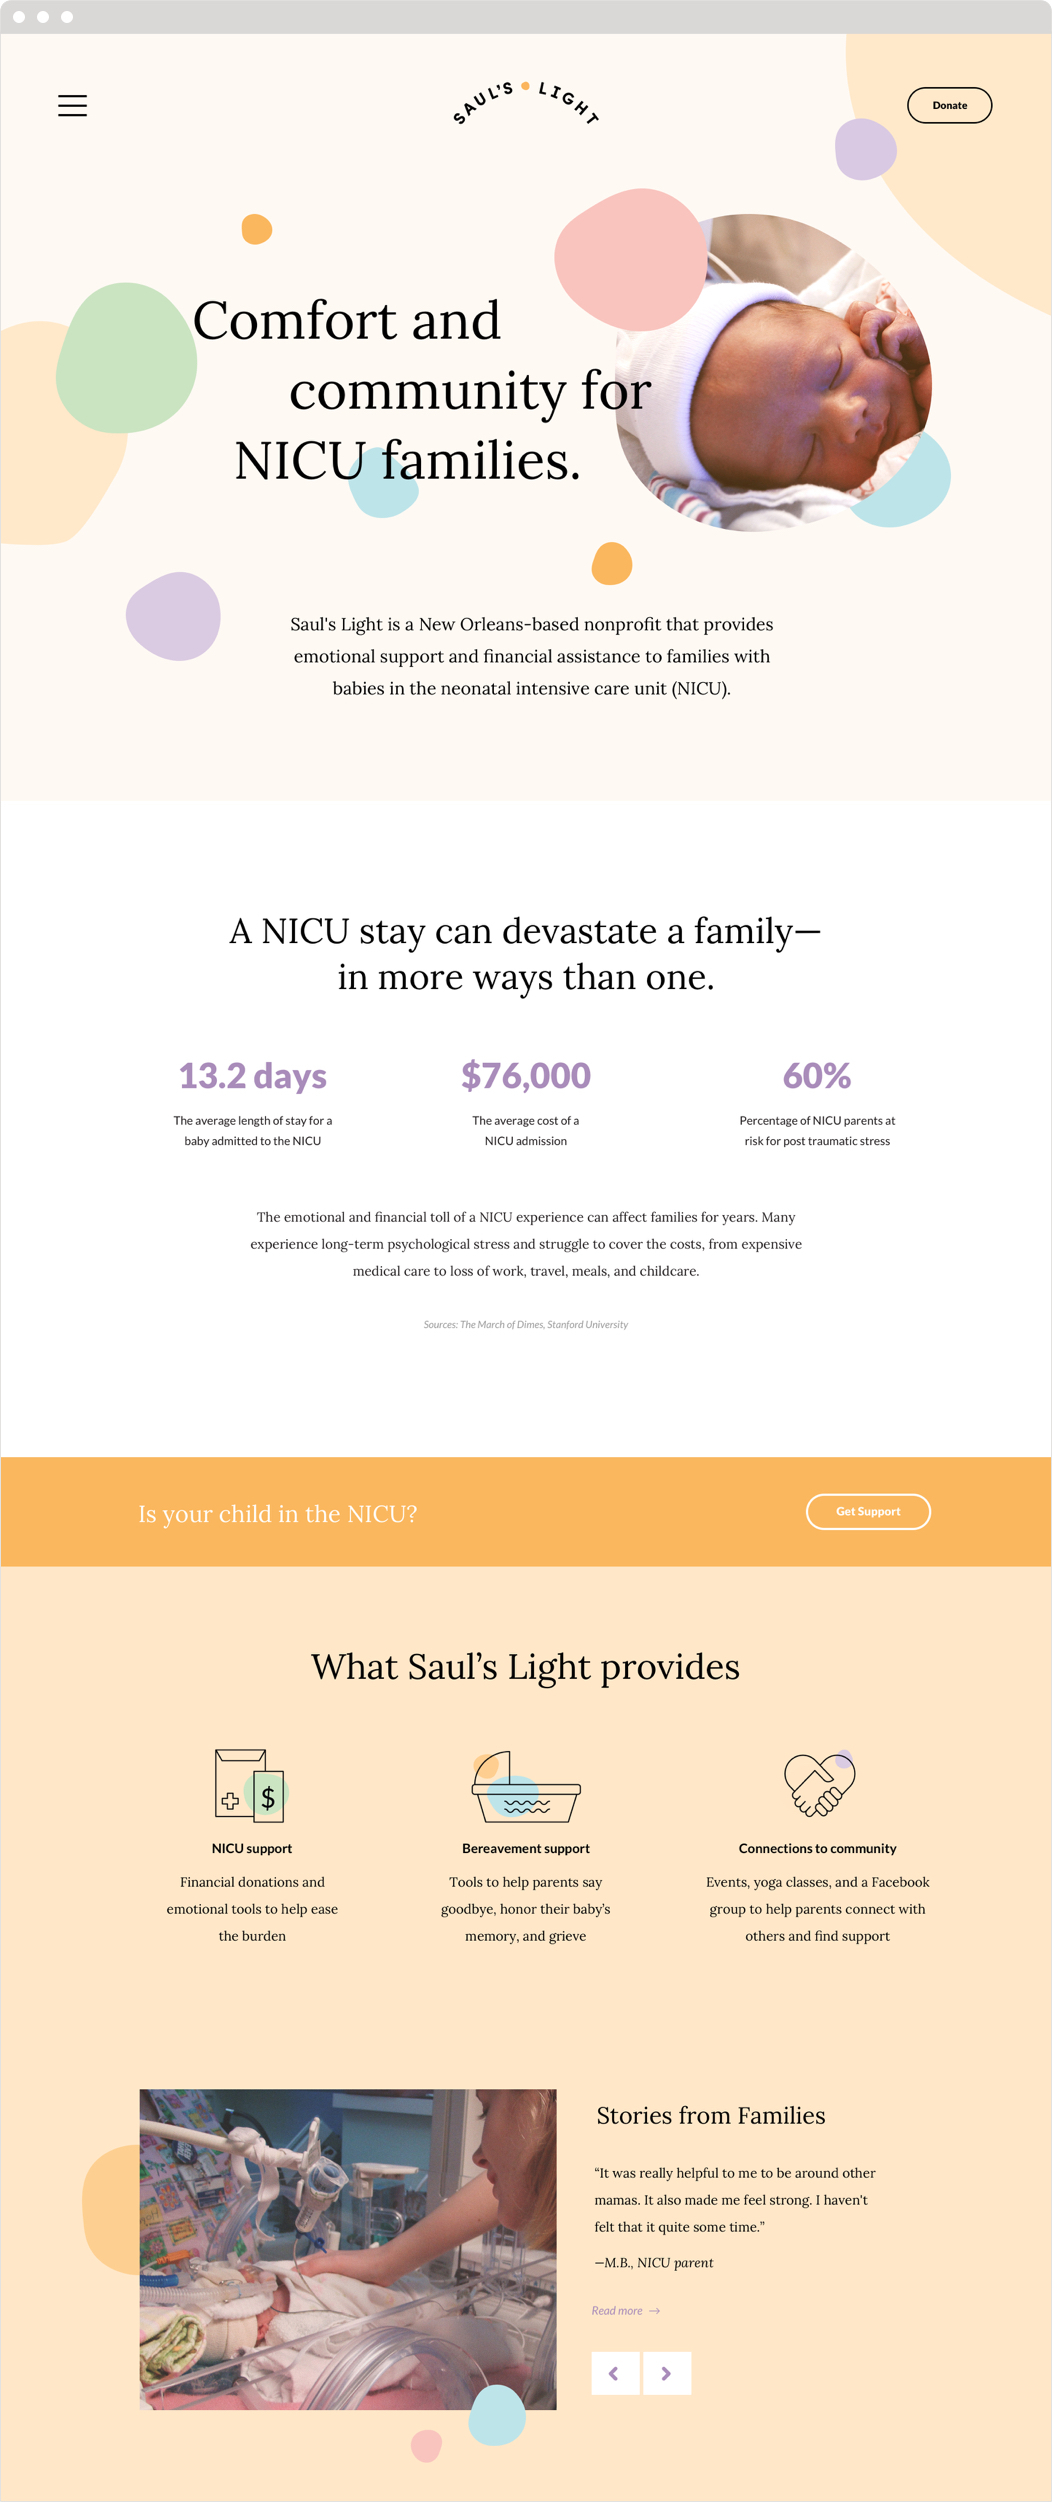 The Saul's Light web homepage, with the image of a newborn and the headline, Comfort and community for NICU families.